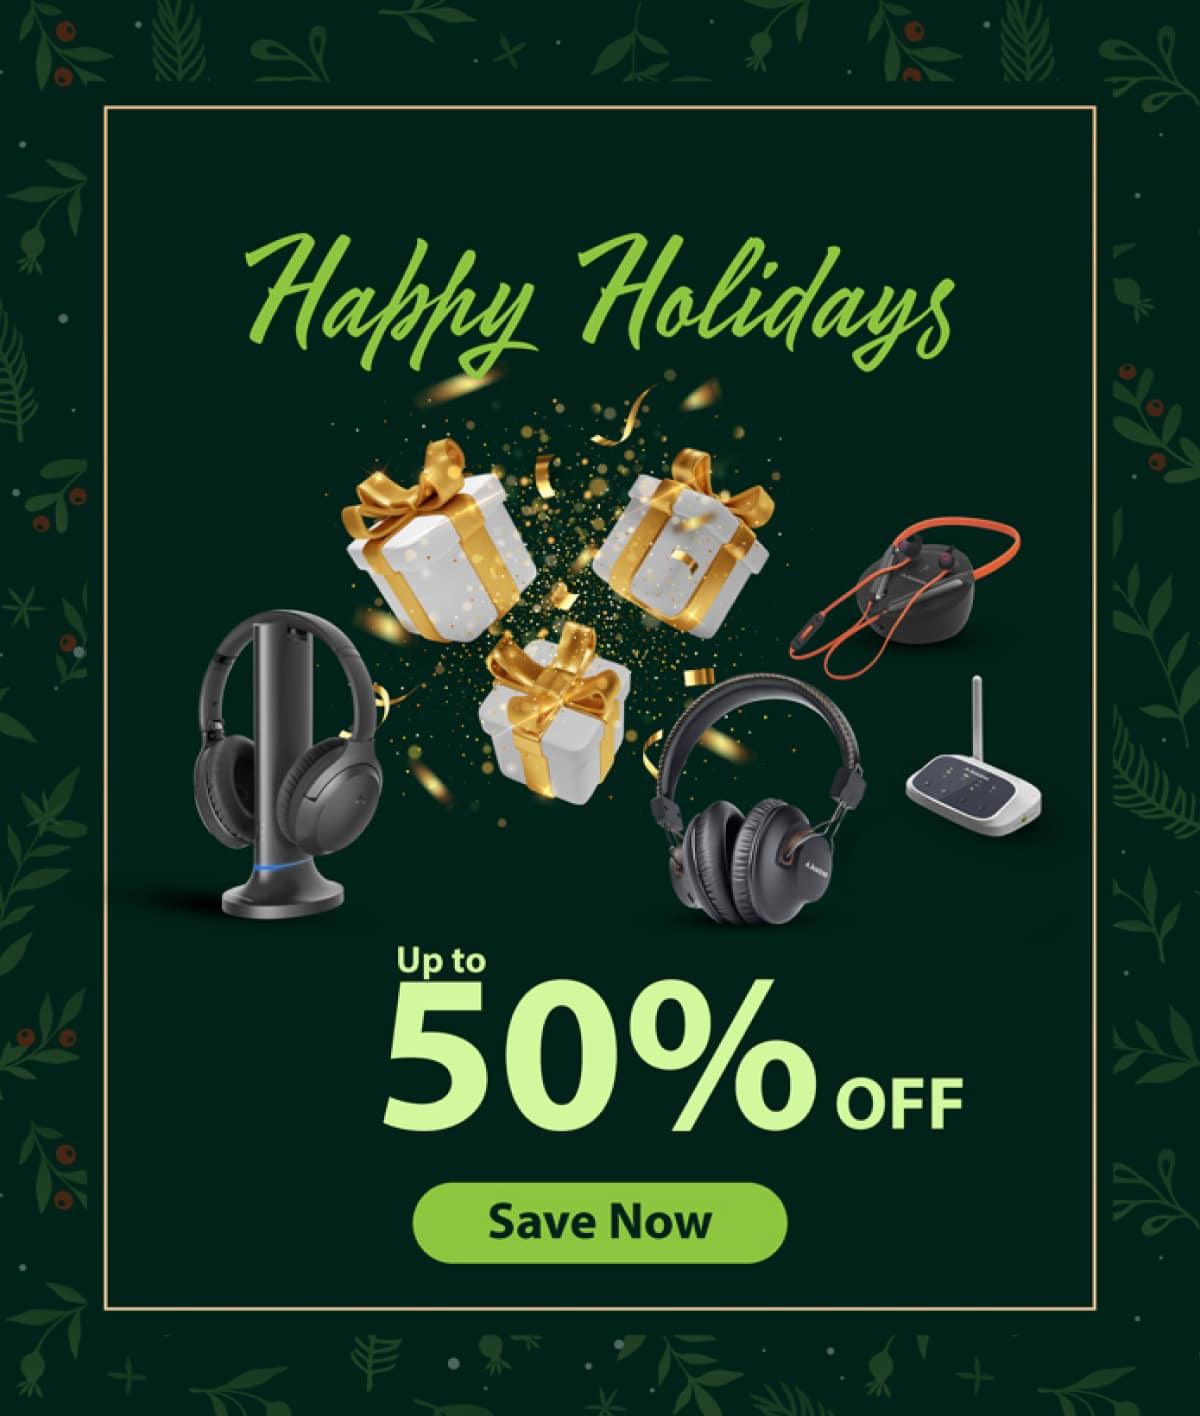 Holiday sales at Avantree up to 50% off